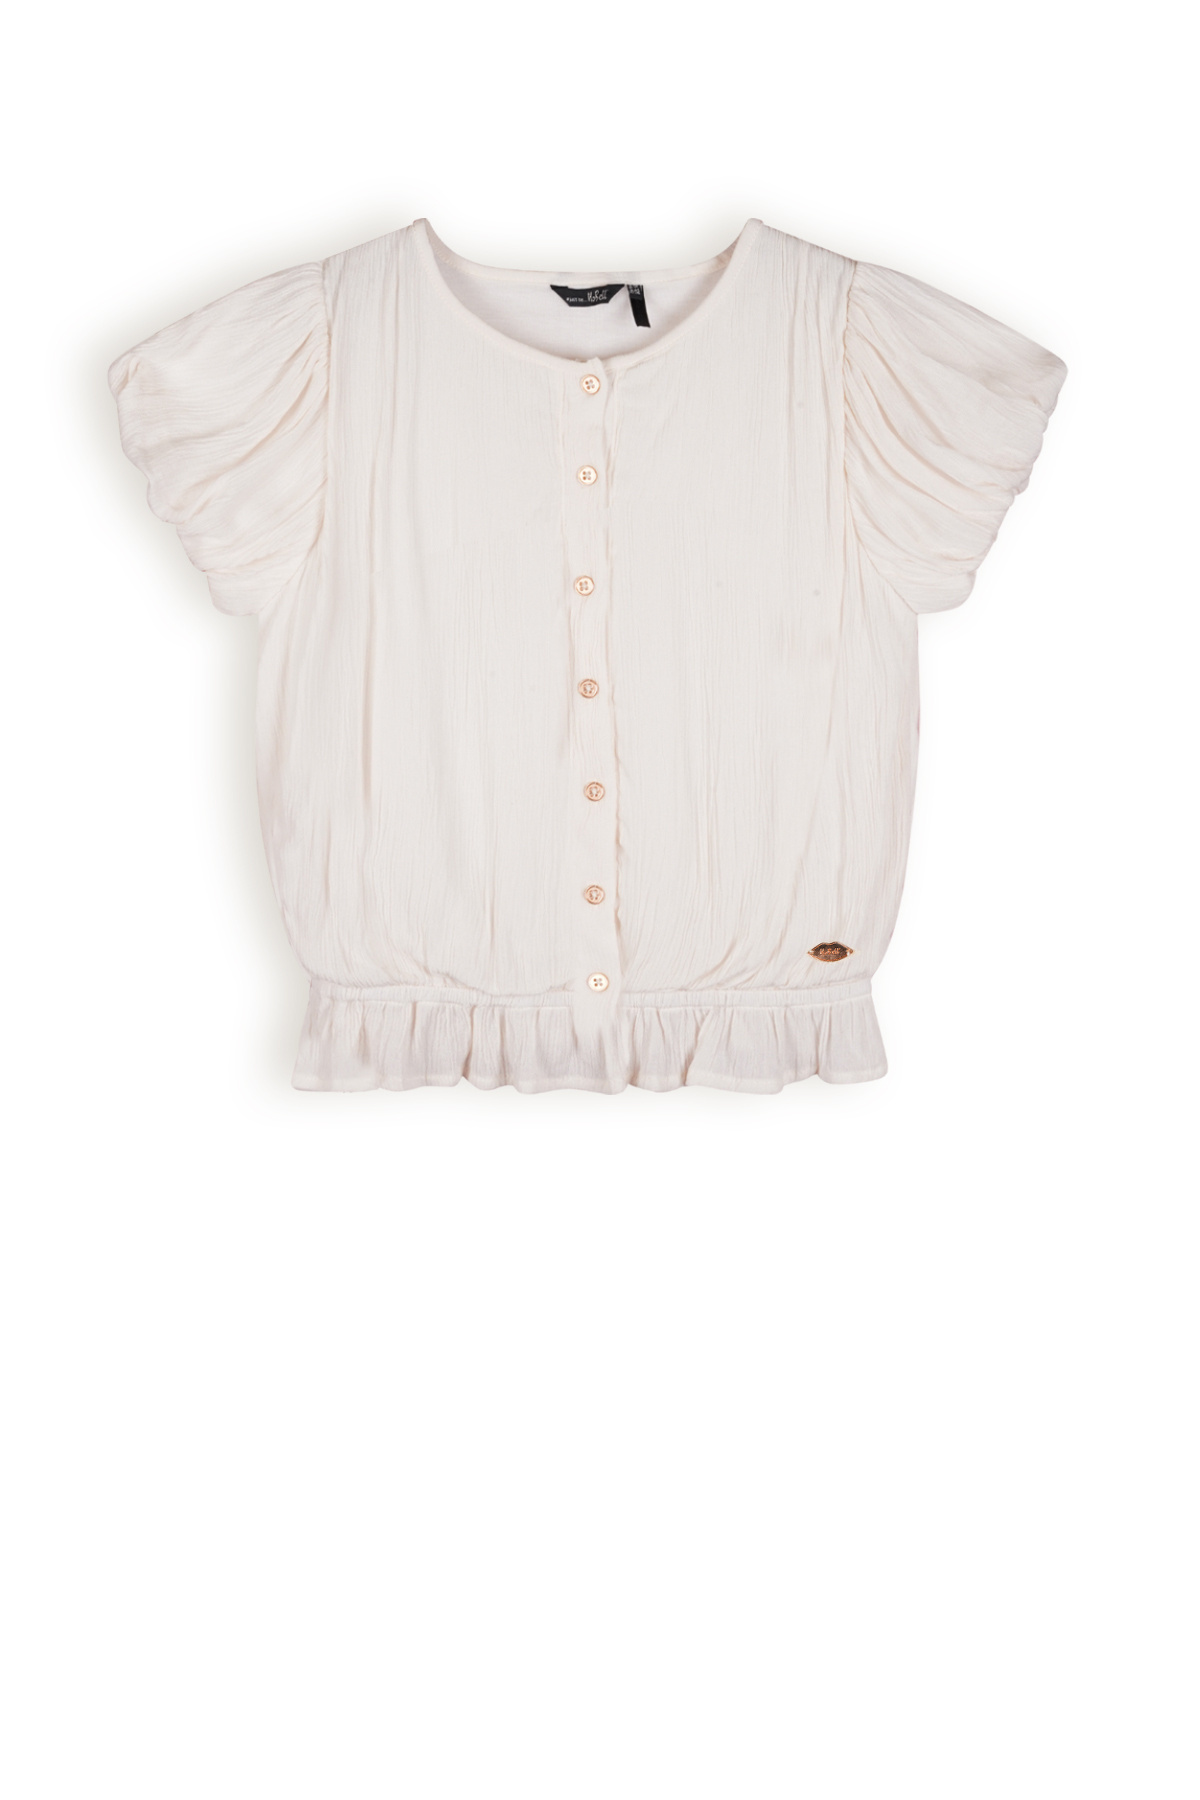 NoBell Meisjes blouse puffy mouw - Tay - Pearled ivoor wit